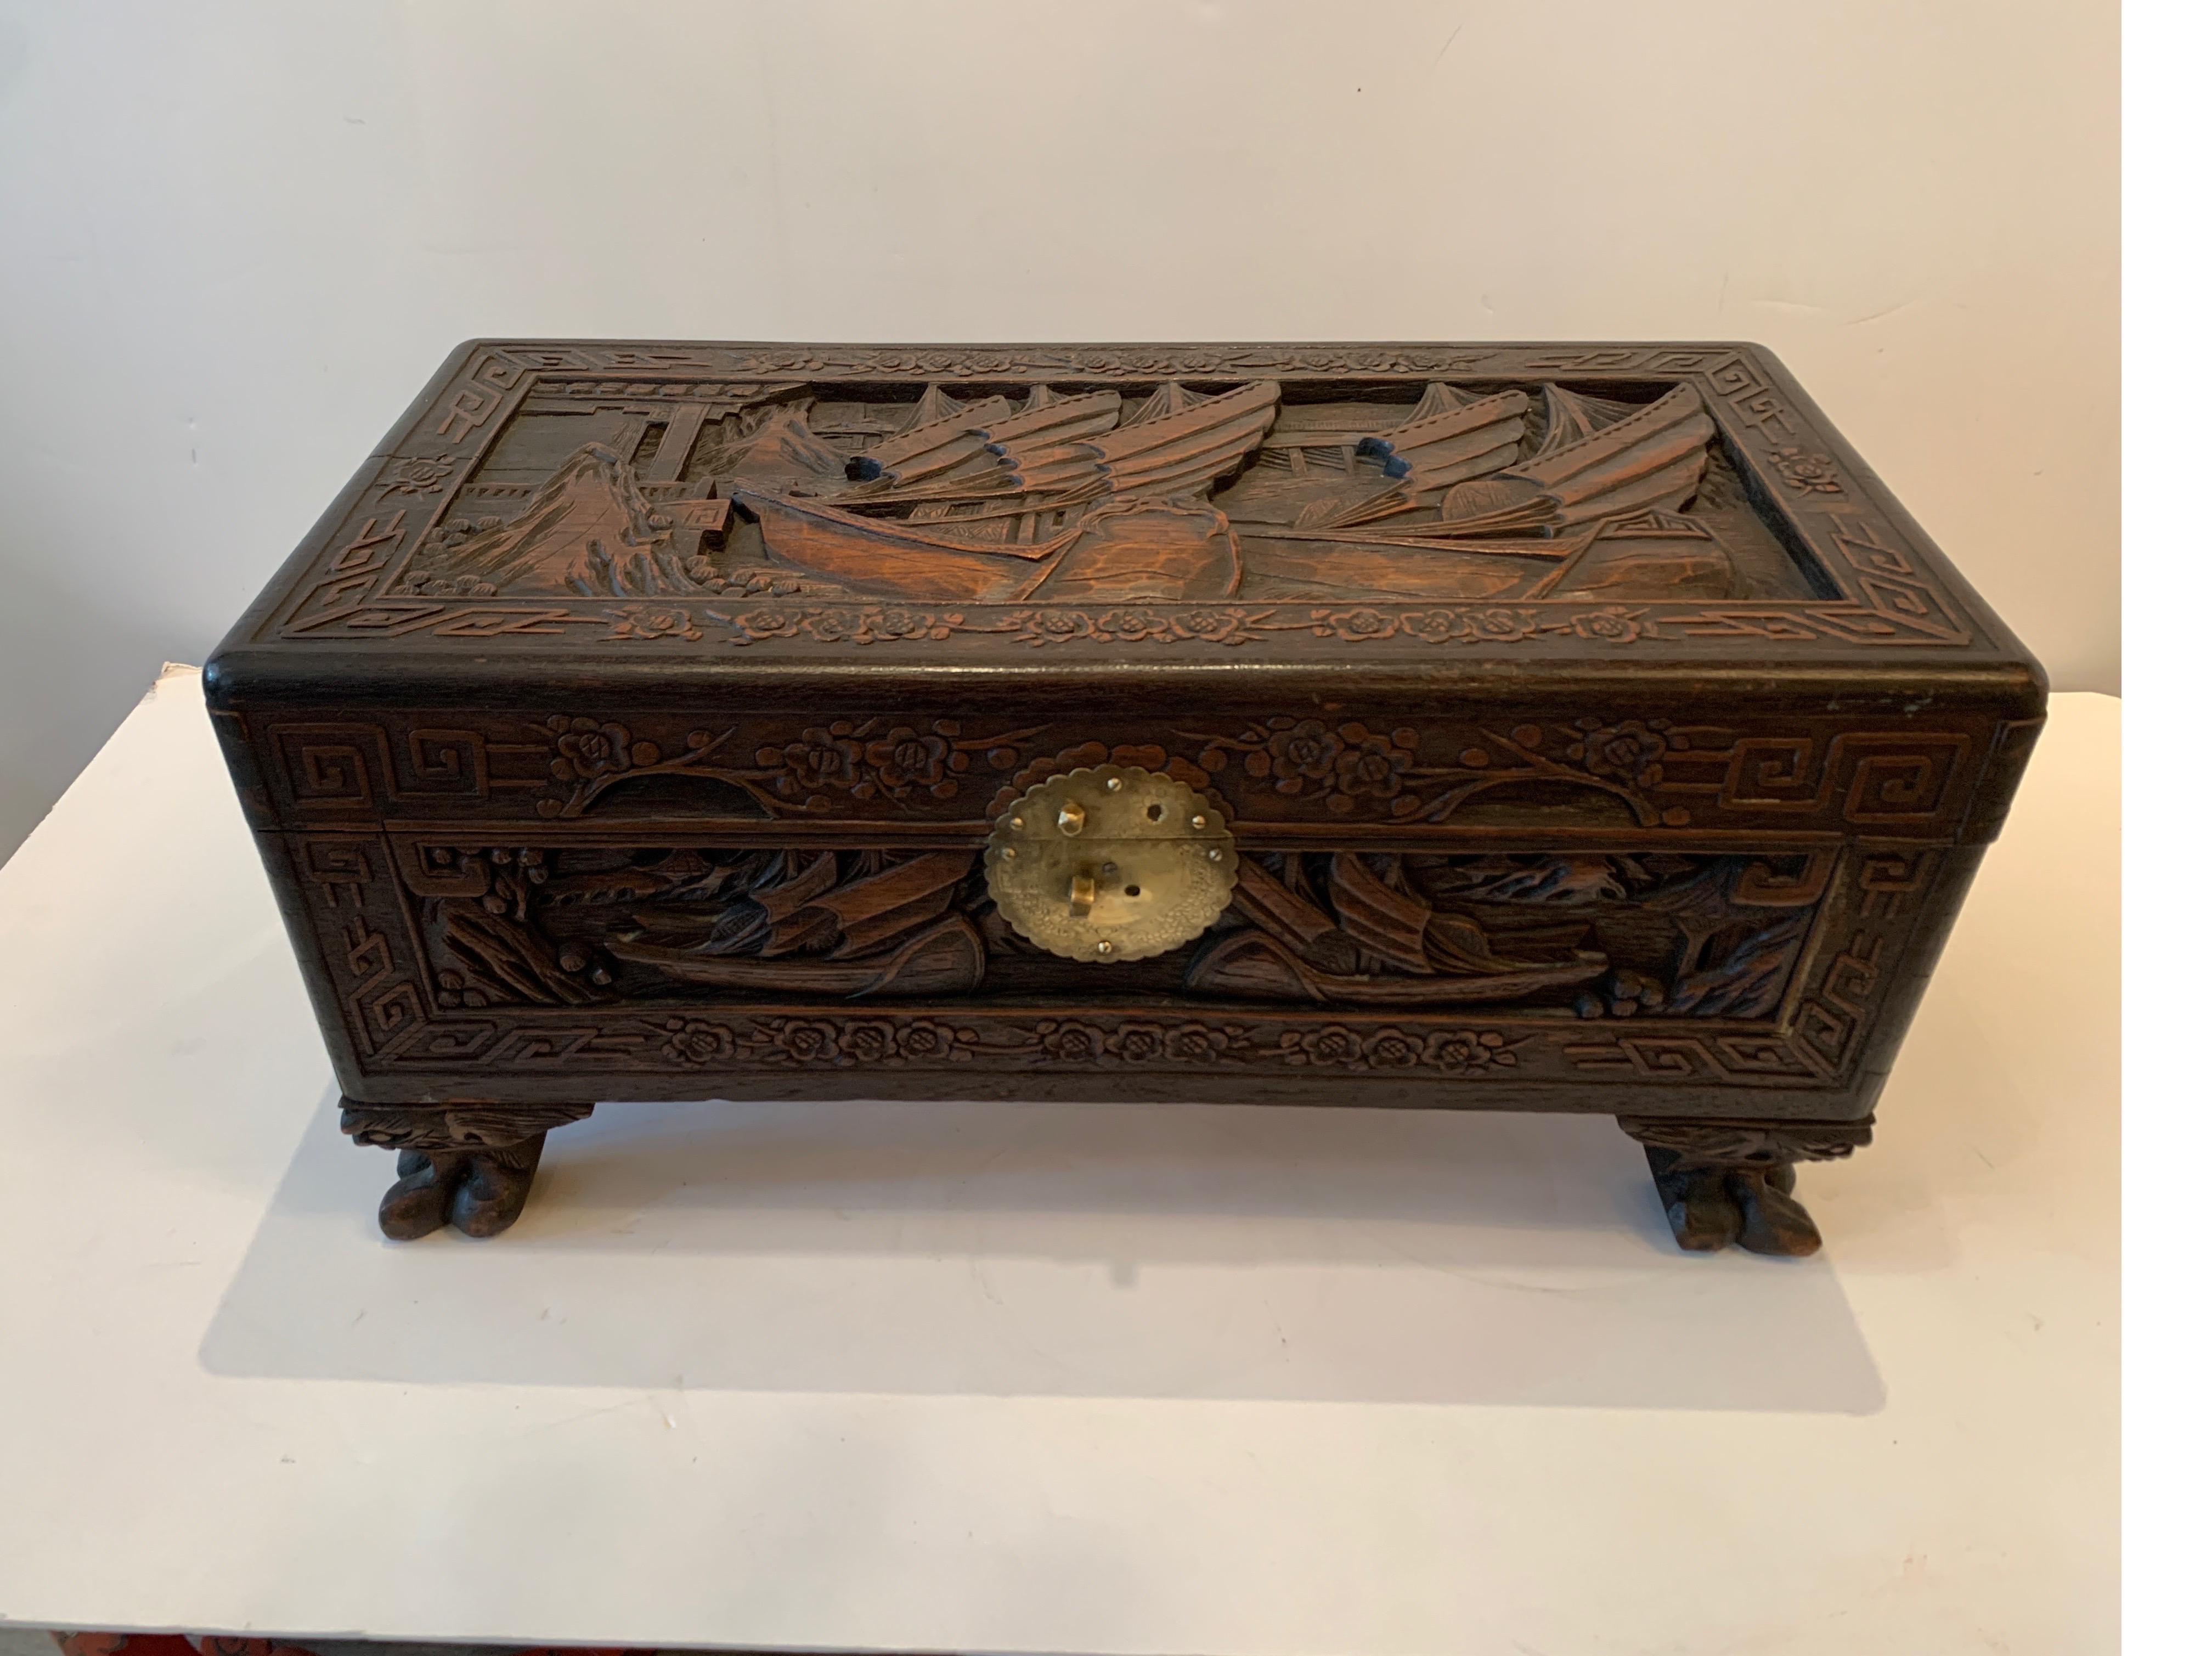 A hand carved Chinese large table box with hinged lid. Intricately carved all-over with Asian carvings resting of four paw feet. Bronze lock plate on front.